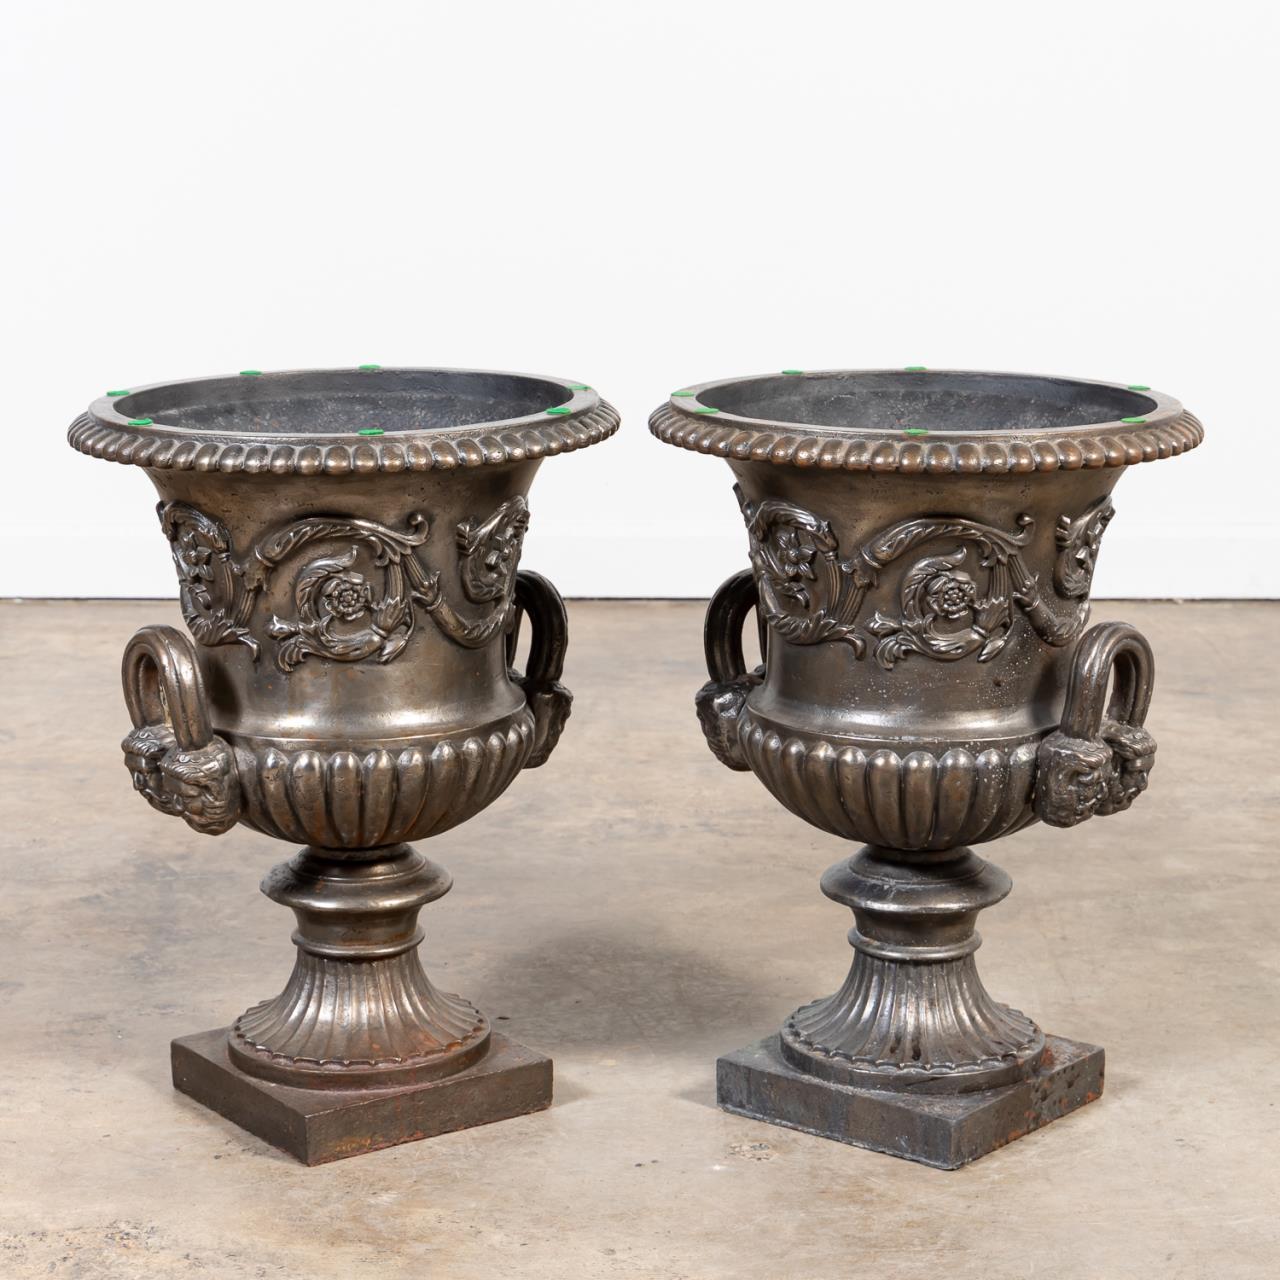 PAIR OF NEOCLASSICAL-STYLE CAST